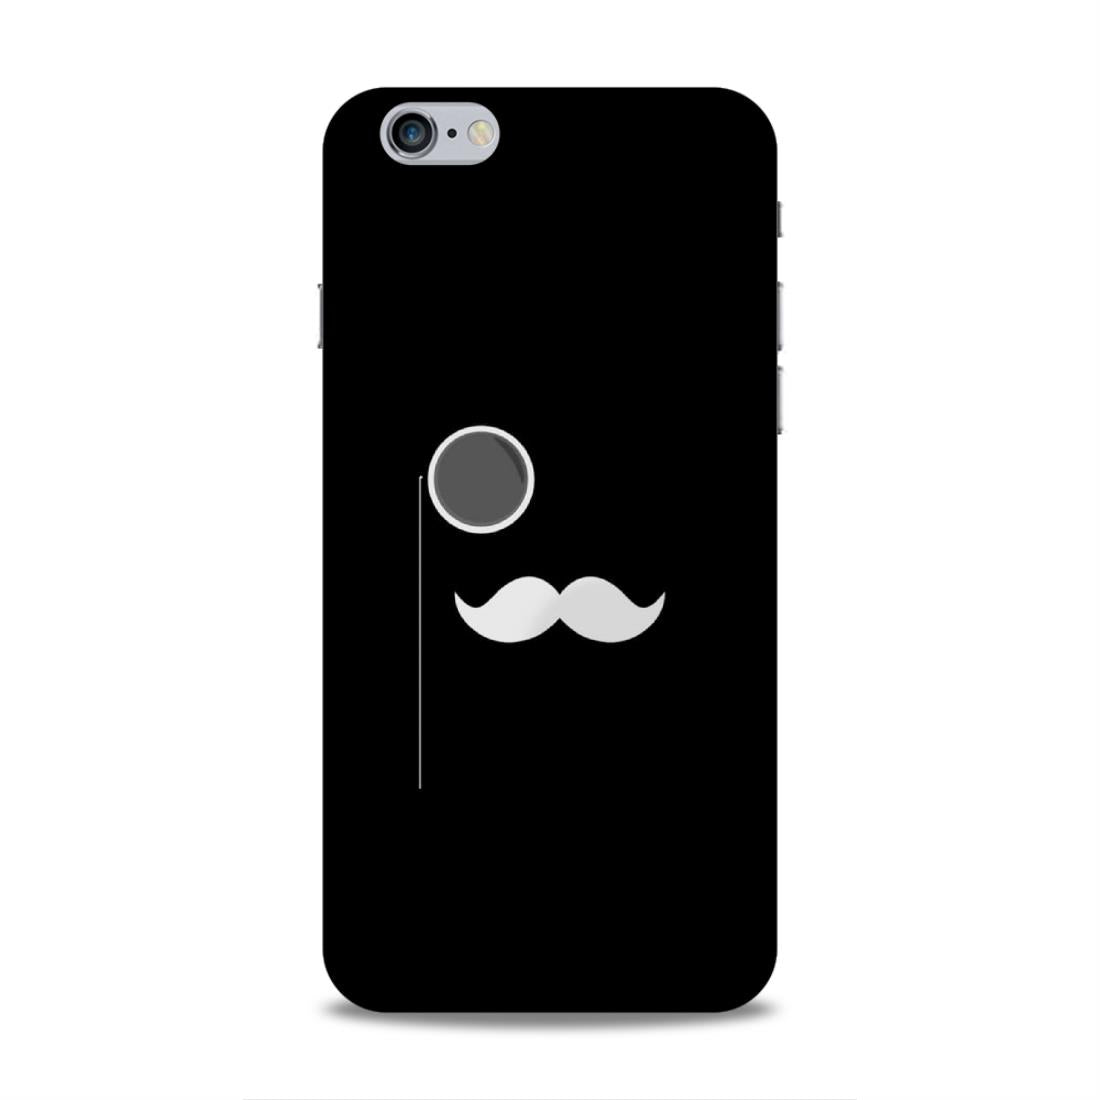 Spect and Mustache Hard Back Case For Apple iPhone 6 Plus / 6s Plus